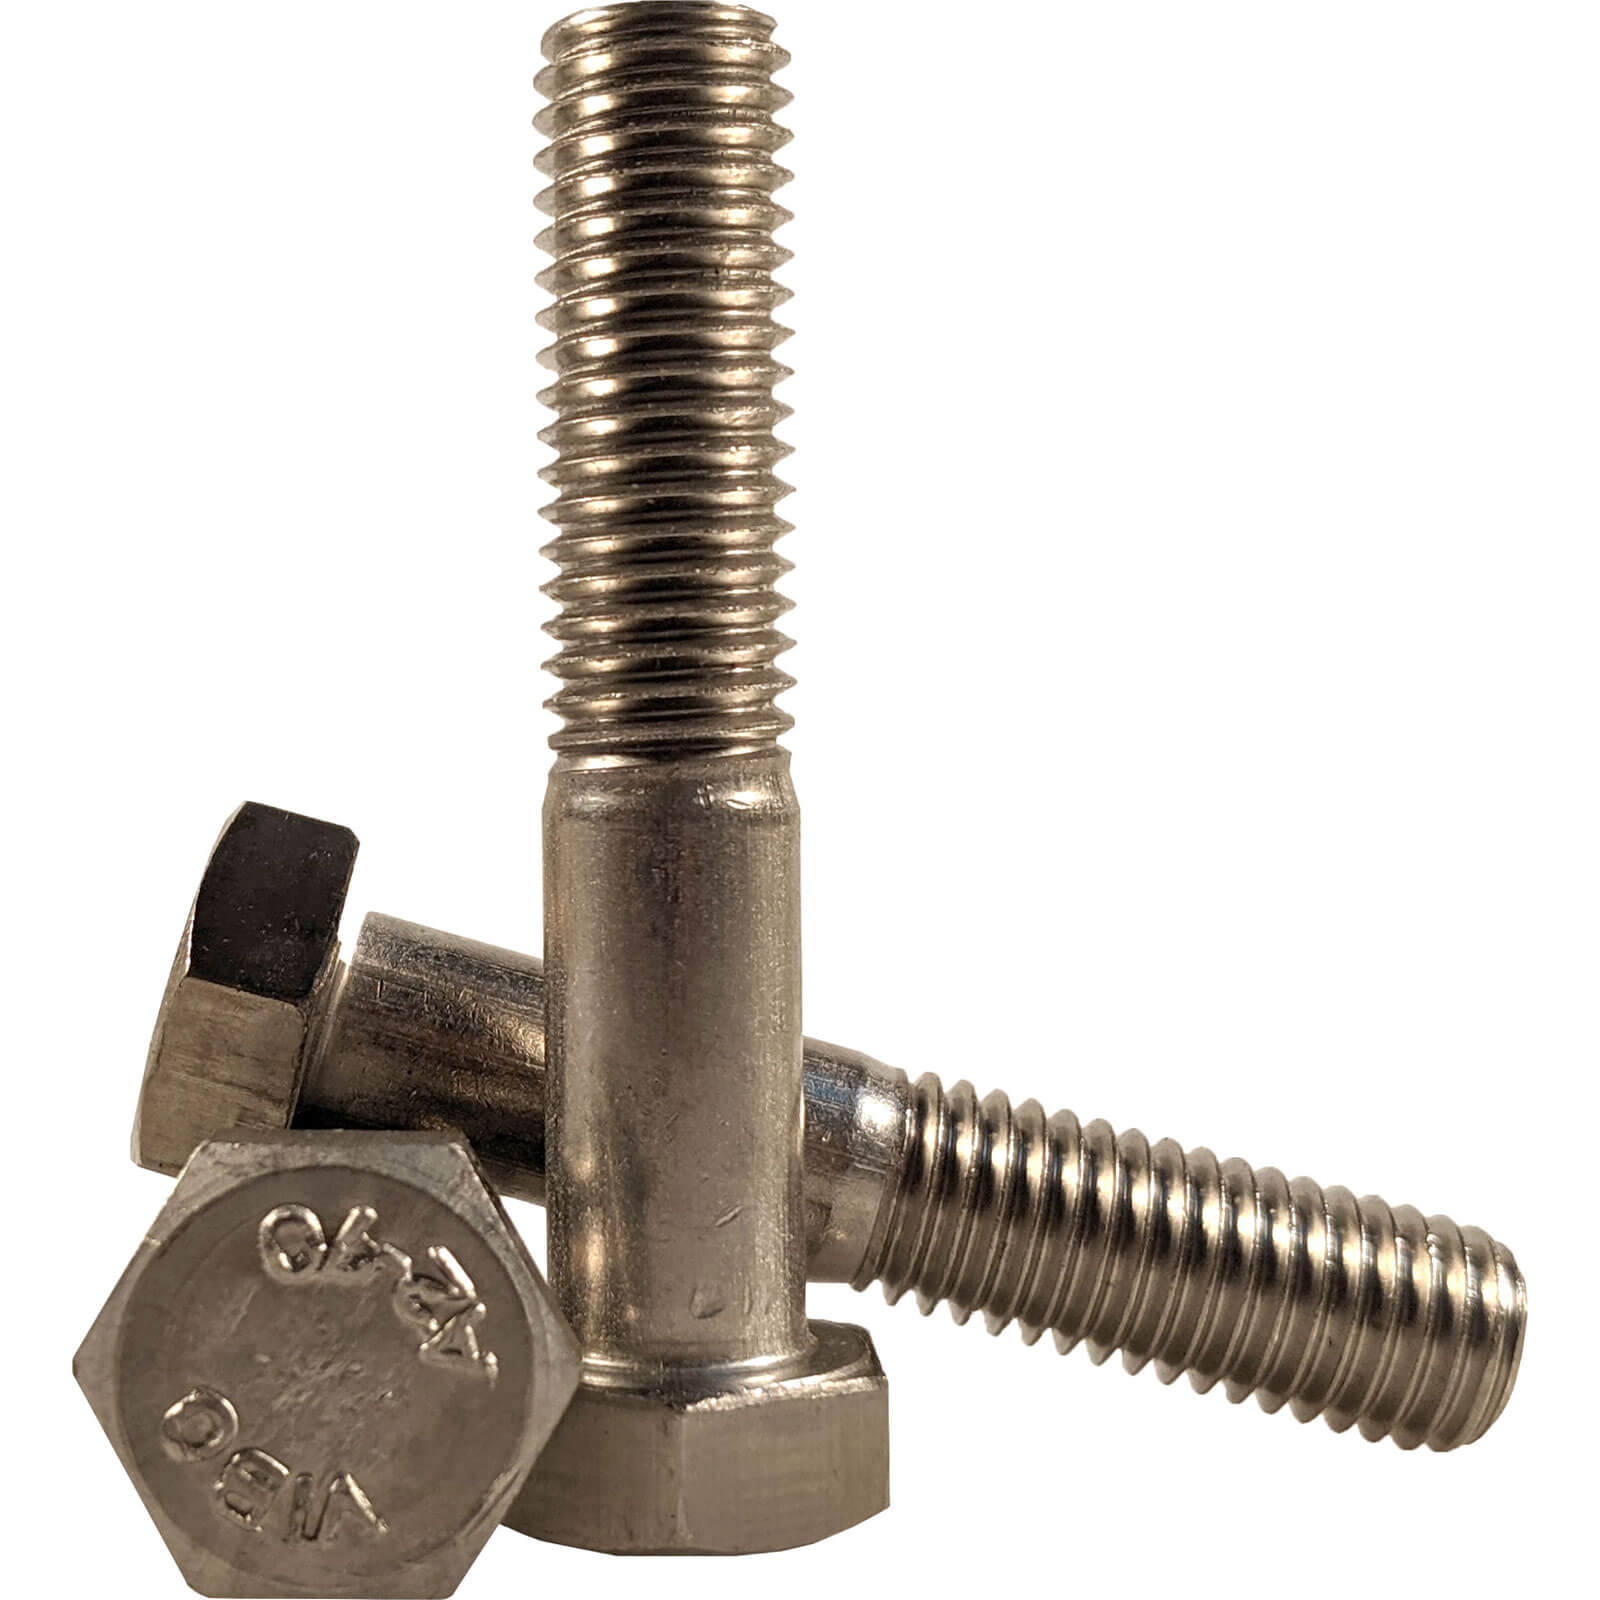 Image of Sirius Bolts A4 316 Stainless Steel M12 50mm Pack of 1